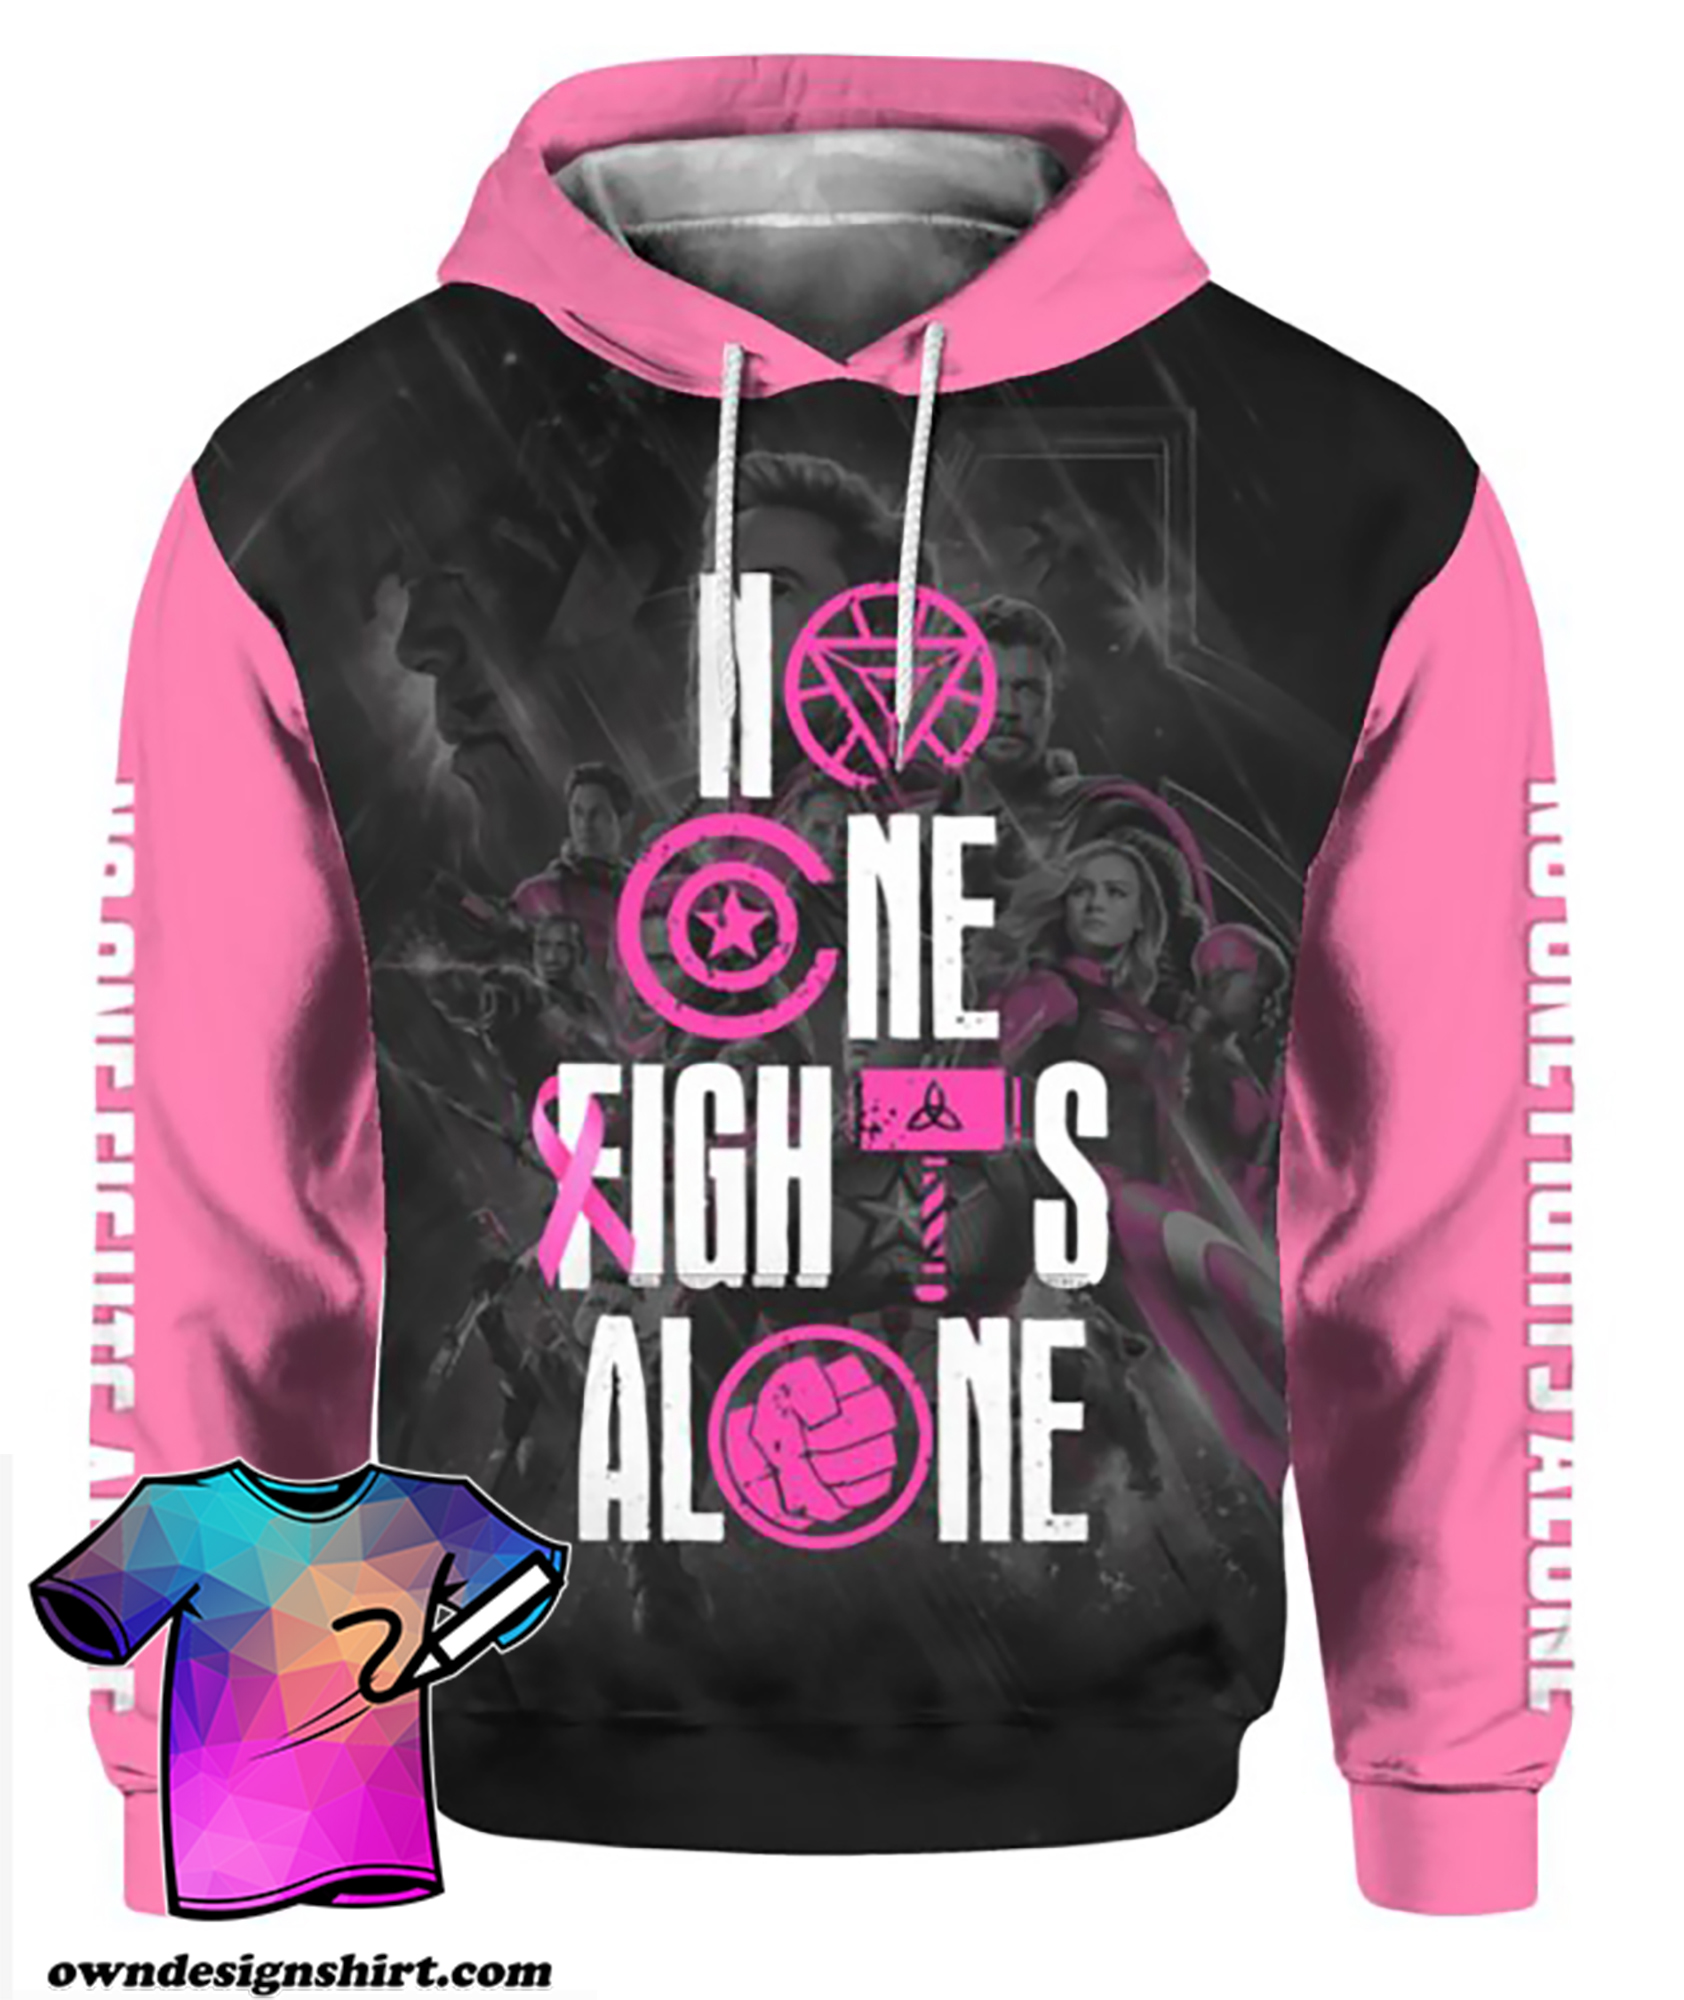 The avengers no one fights alone breast cancer awareness all over printed hoodie